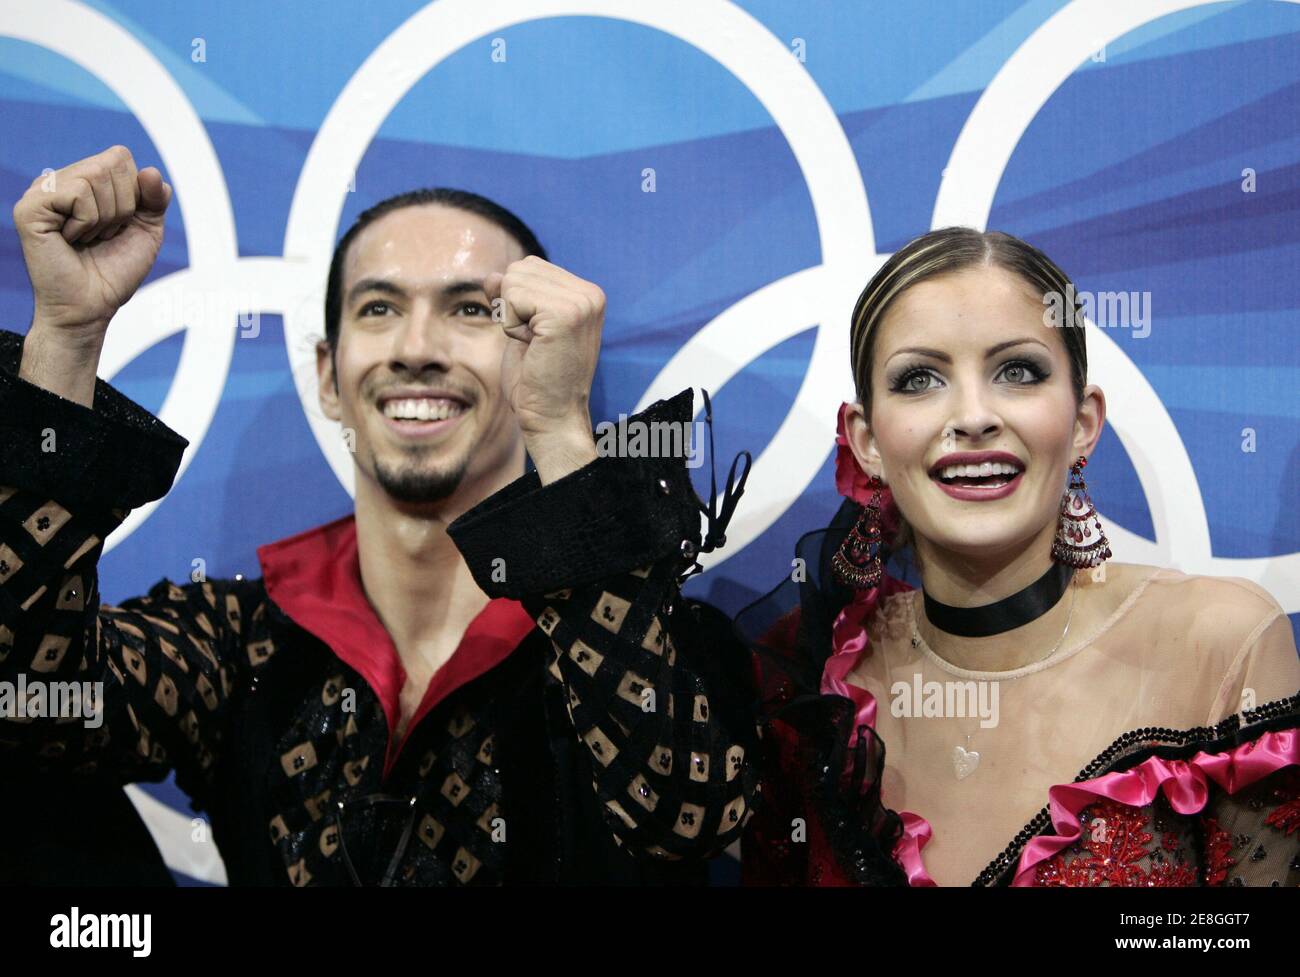 Tanith Belbin and Benjamin Agosto (L) from the U.S. celebrate after their free dance in the ice dancing competition during the Figure Skating at the Torino 2006 Winter Olympic Games in Turin, Italy, February 20, 2006. Stock Photo